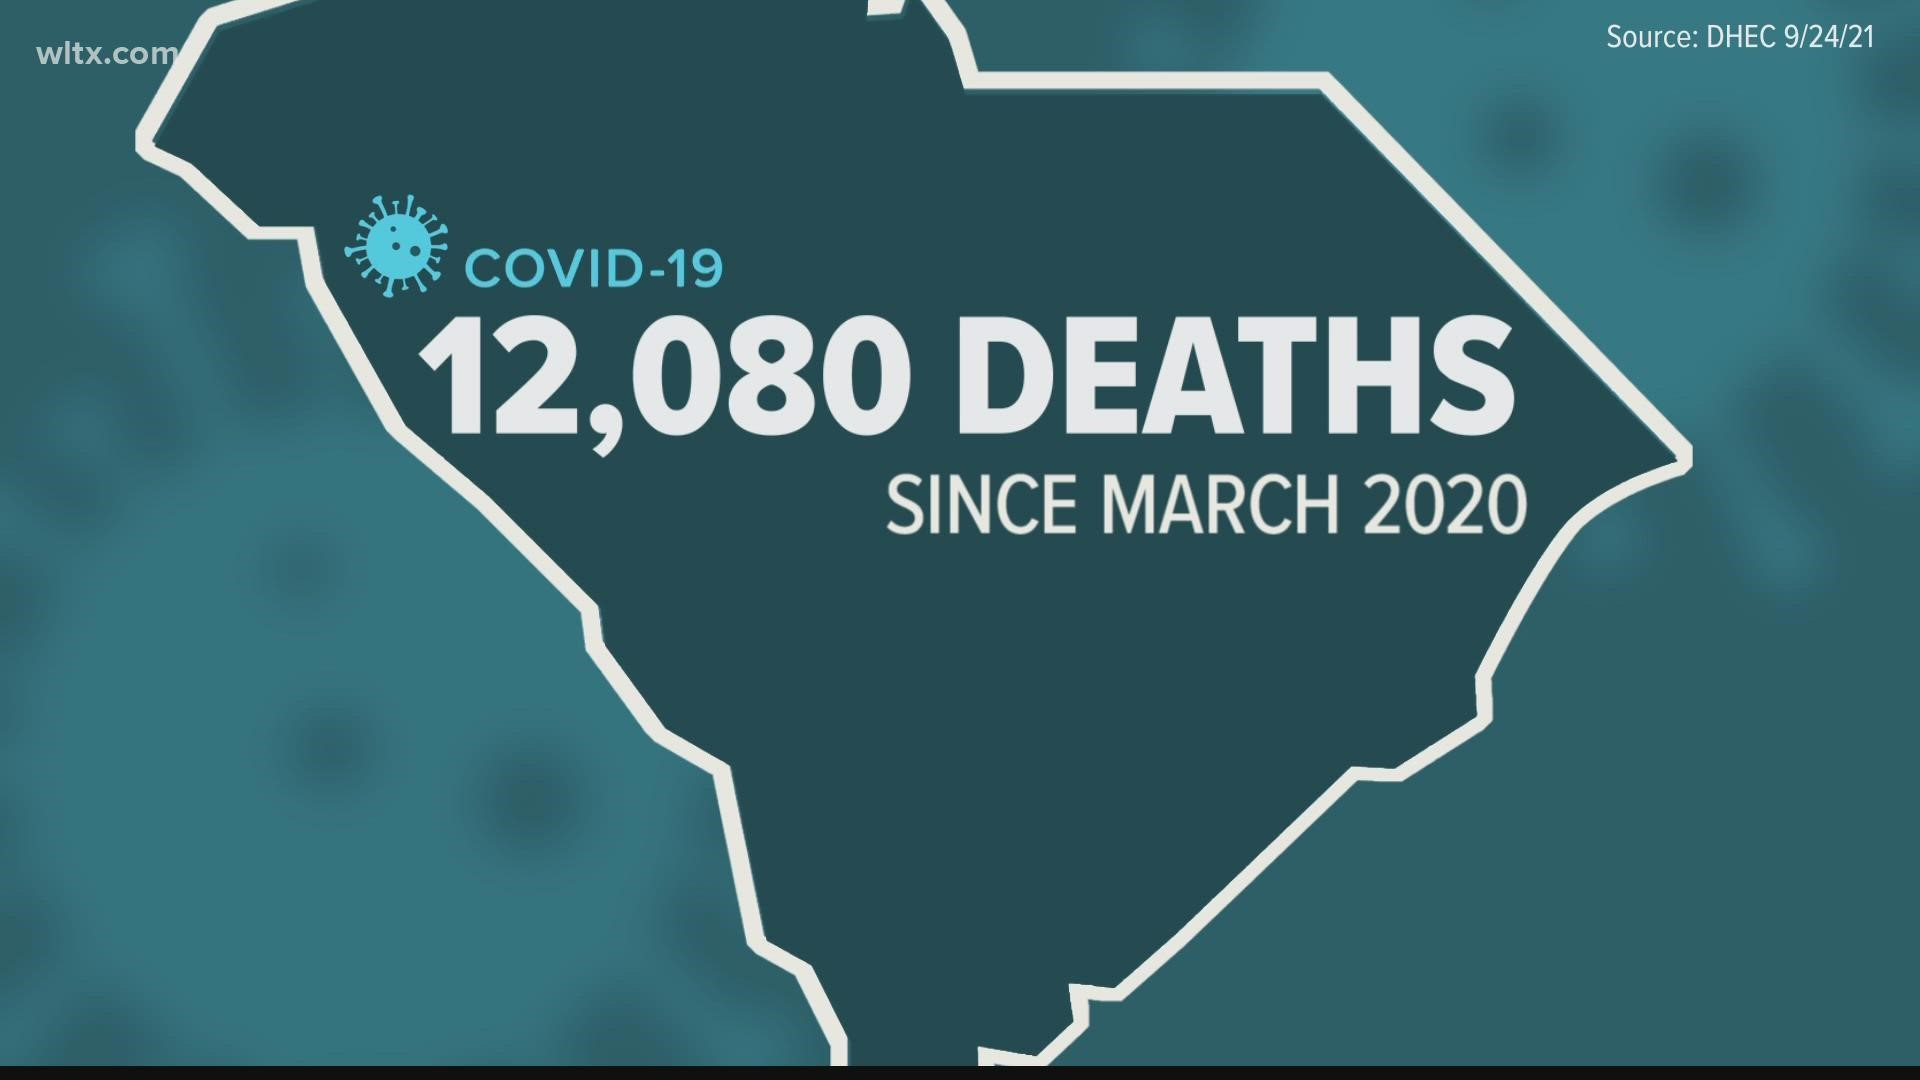 The state now has seen 12,077 deaths since the pandemic began, according to data published by the state's health agency, DHEC, on Friday.